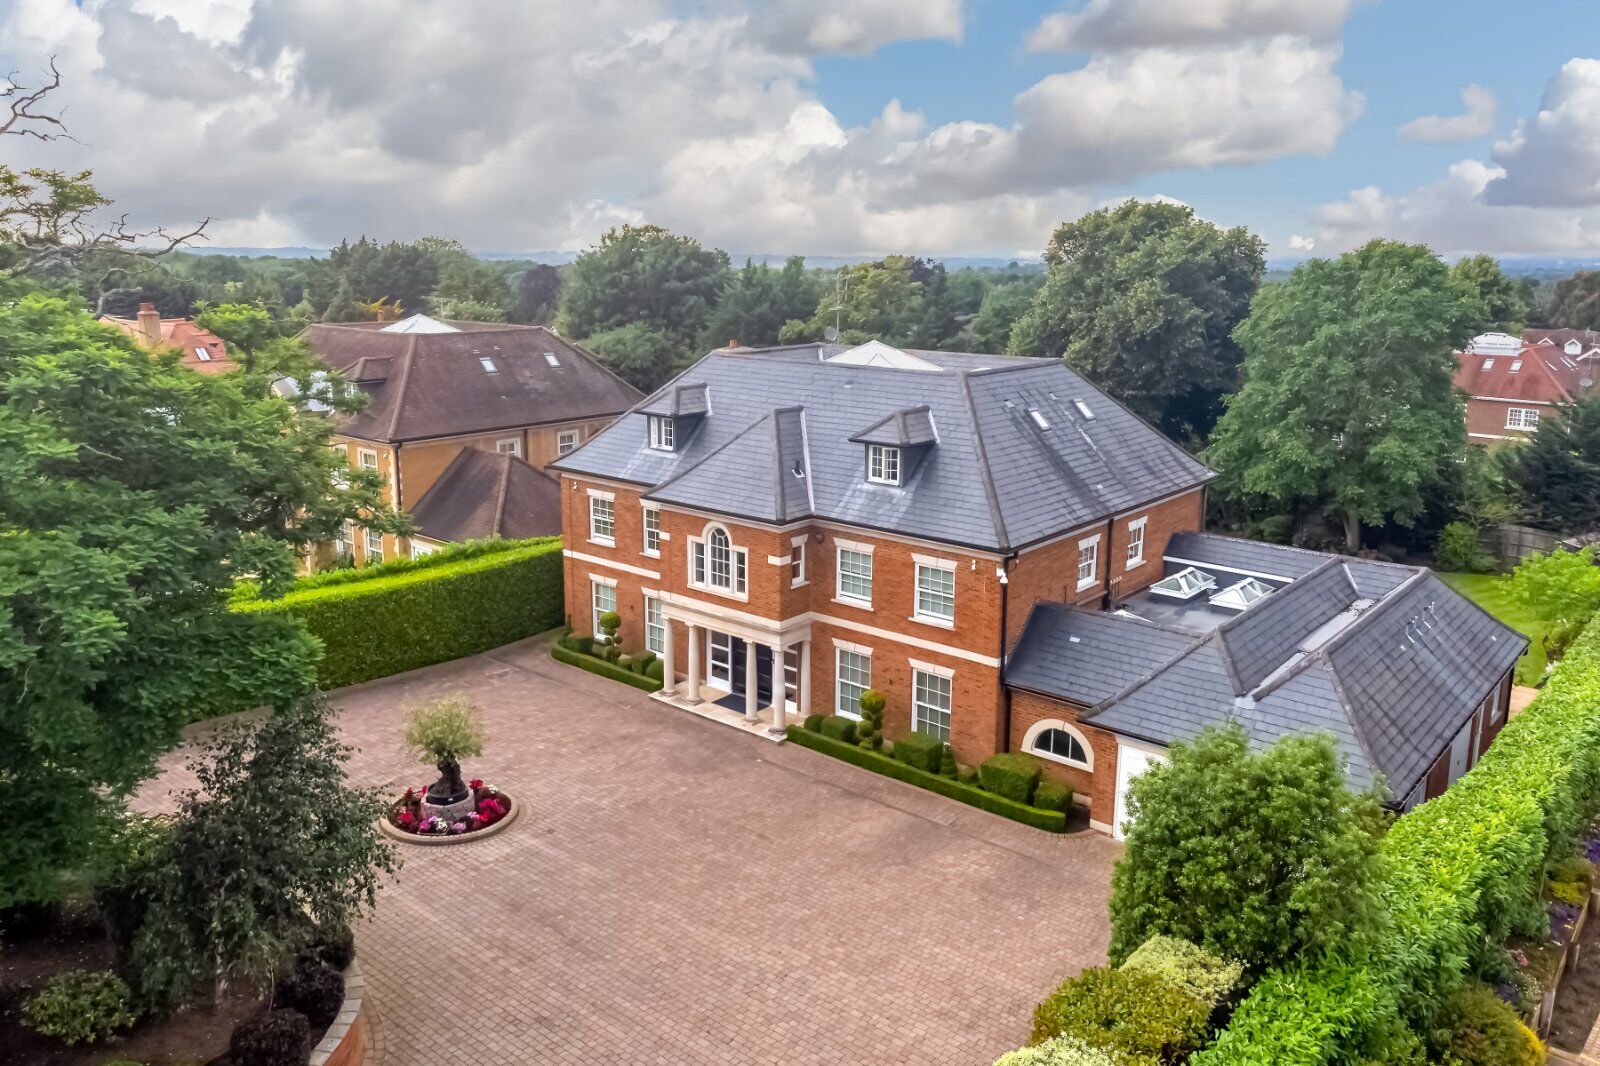 7 bedroom detached house for sale The Drive, Cheam, SM2, main image